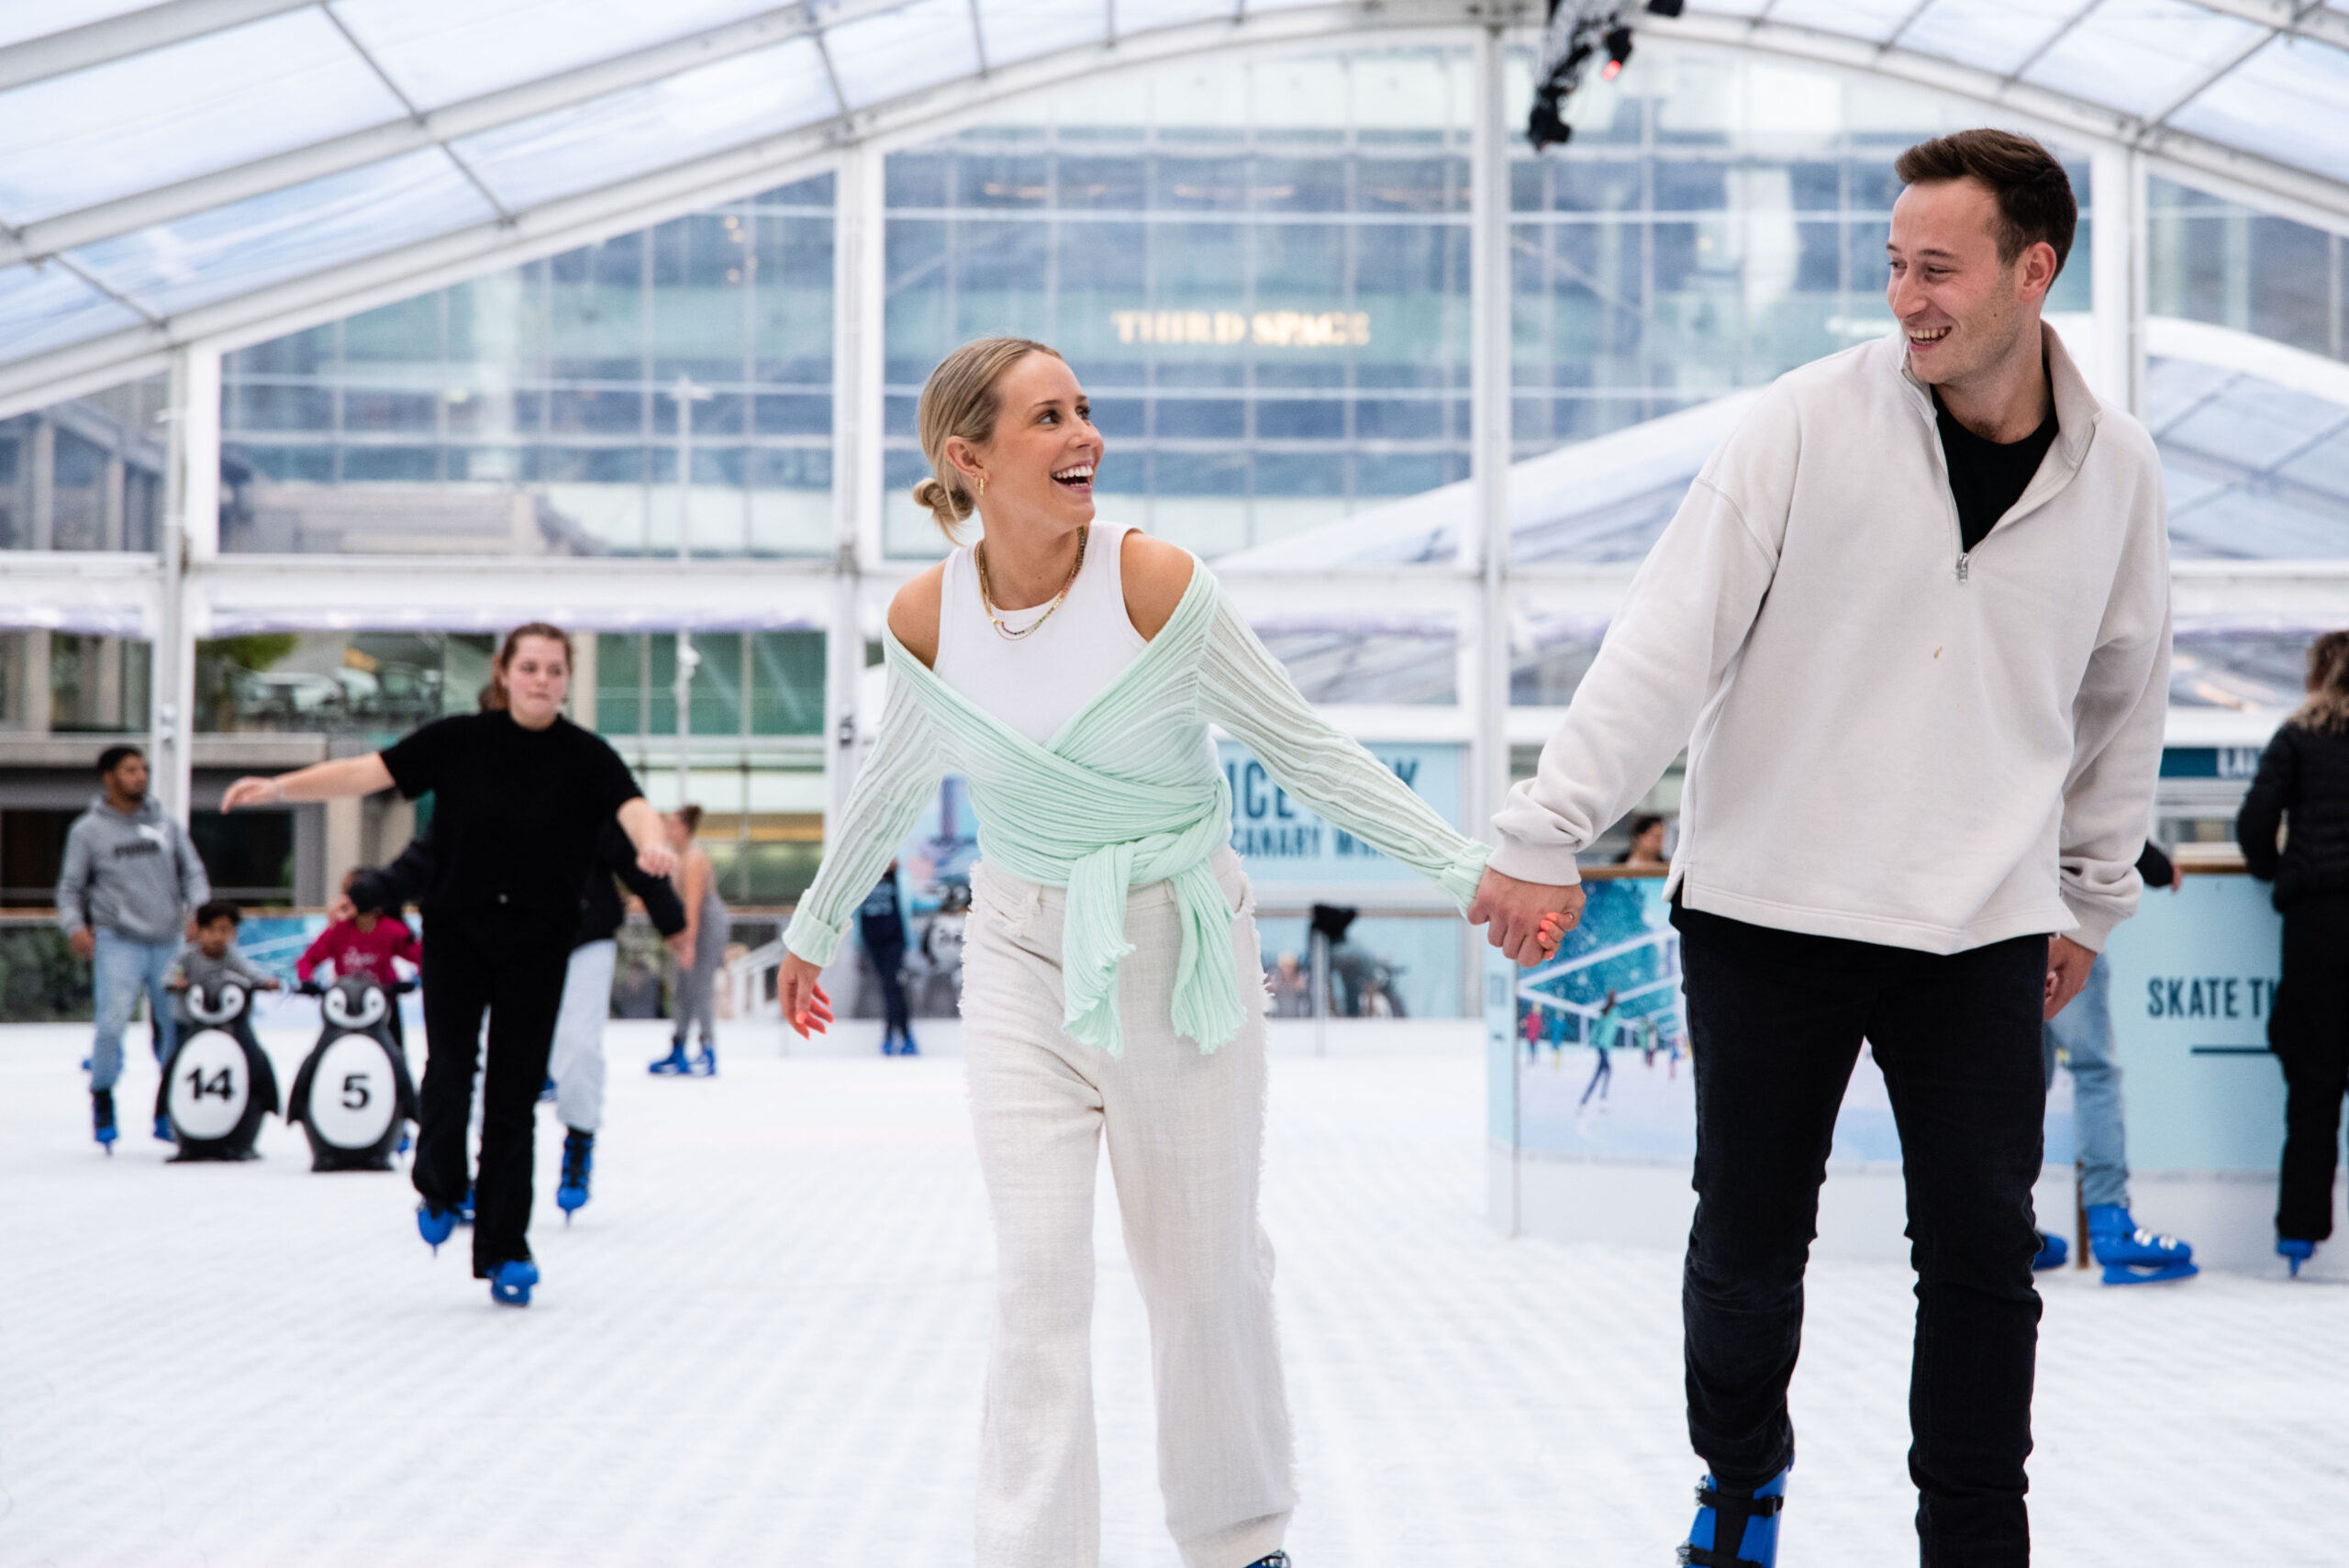 Lace up your skates: Last chance to try London's longest running ice rink in Canary Wharf 